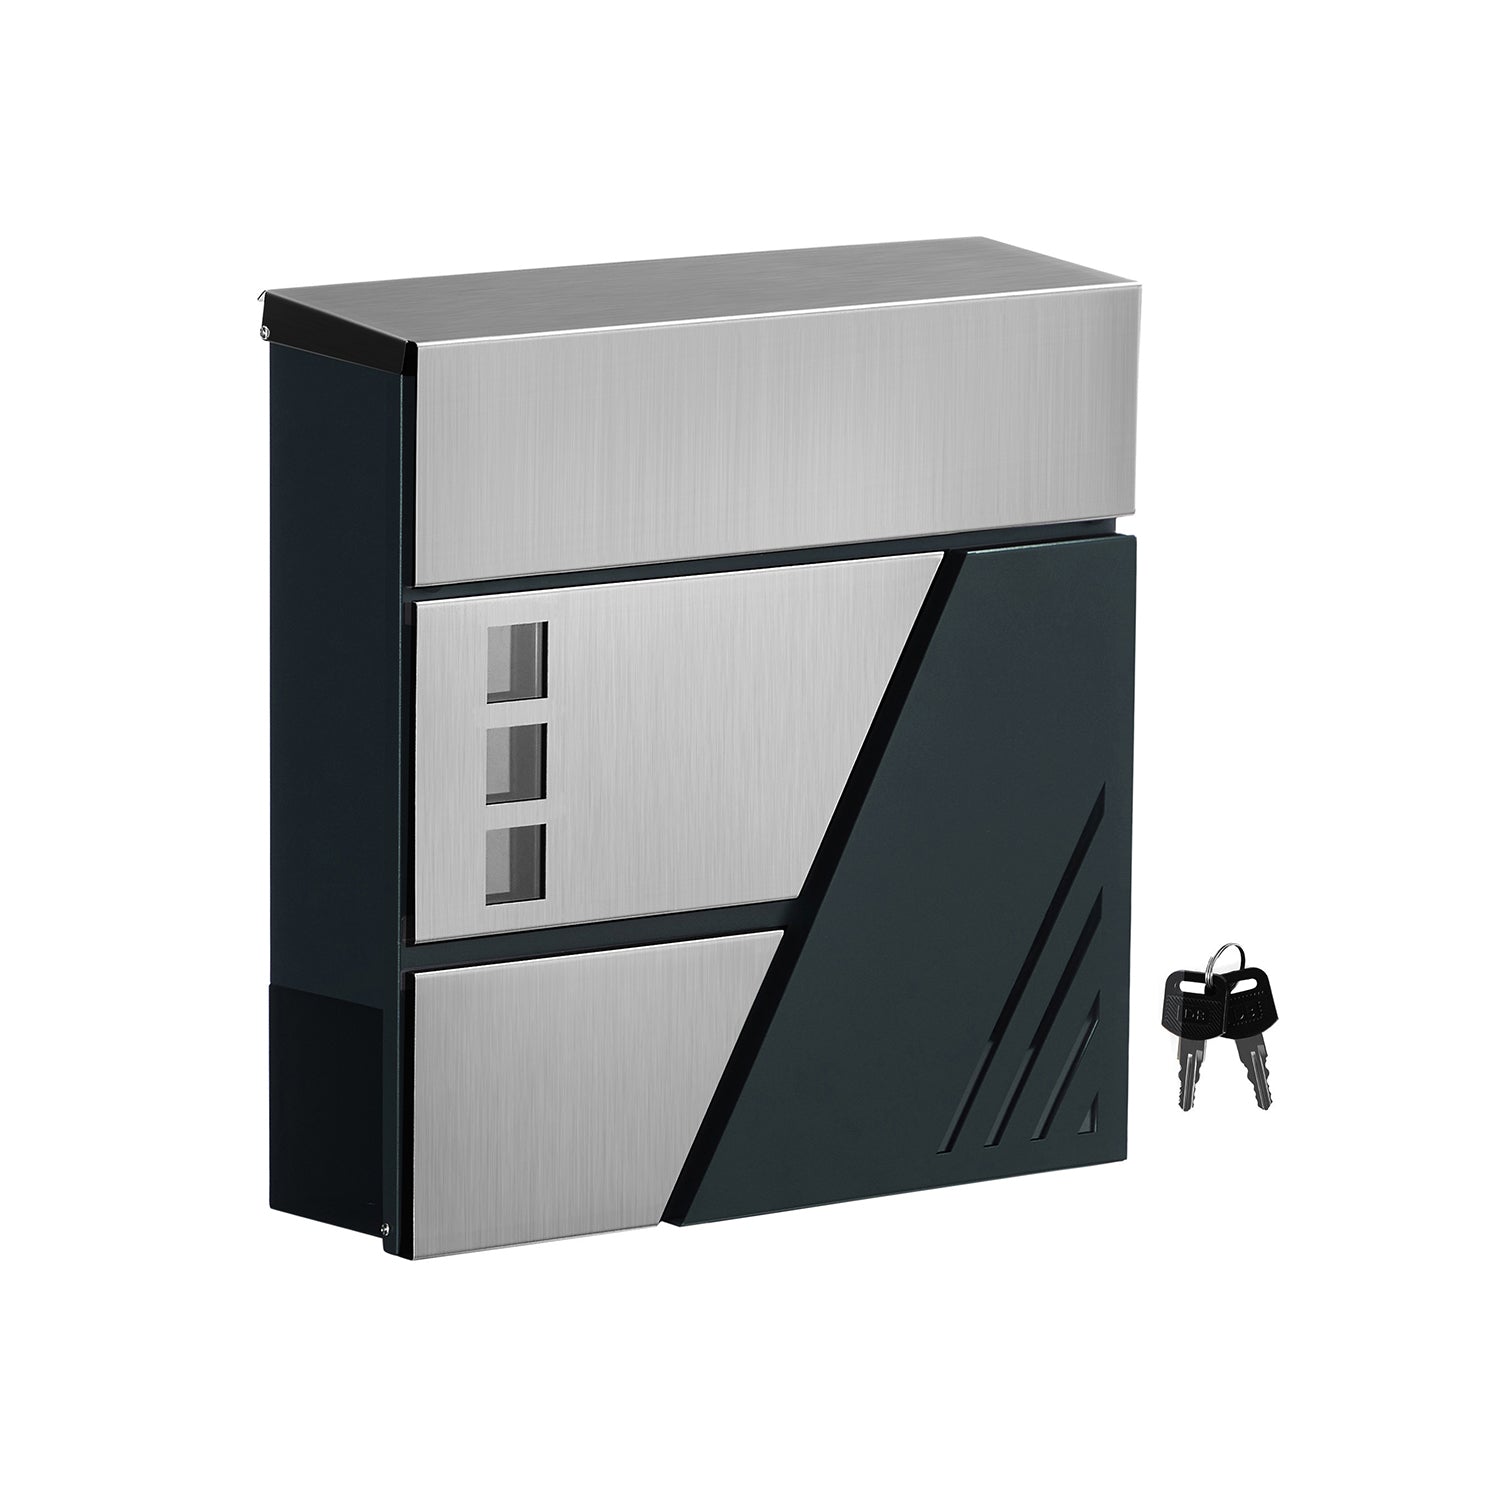 Image of Mailbox, Wall-Mounted Letter Box with Viewing Windows, Stainless Steel for Porch and Front Door, with Lock and Keys, Silver and Anthracite Grey